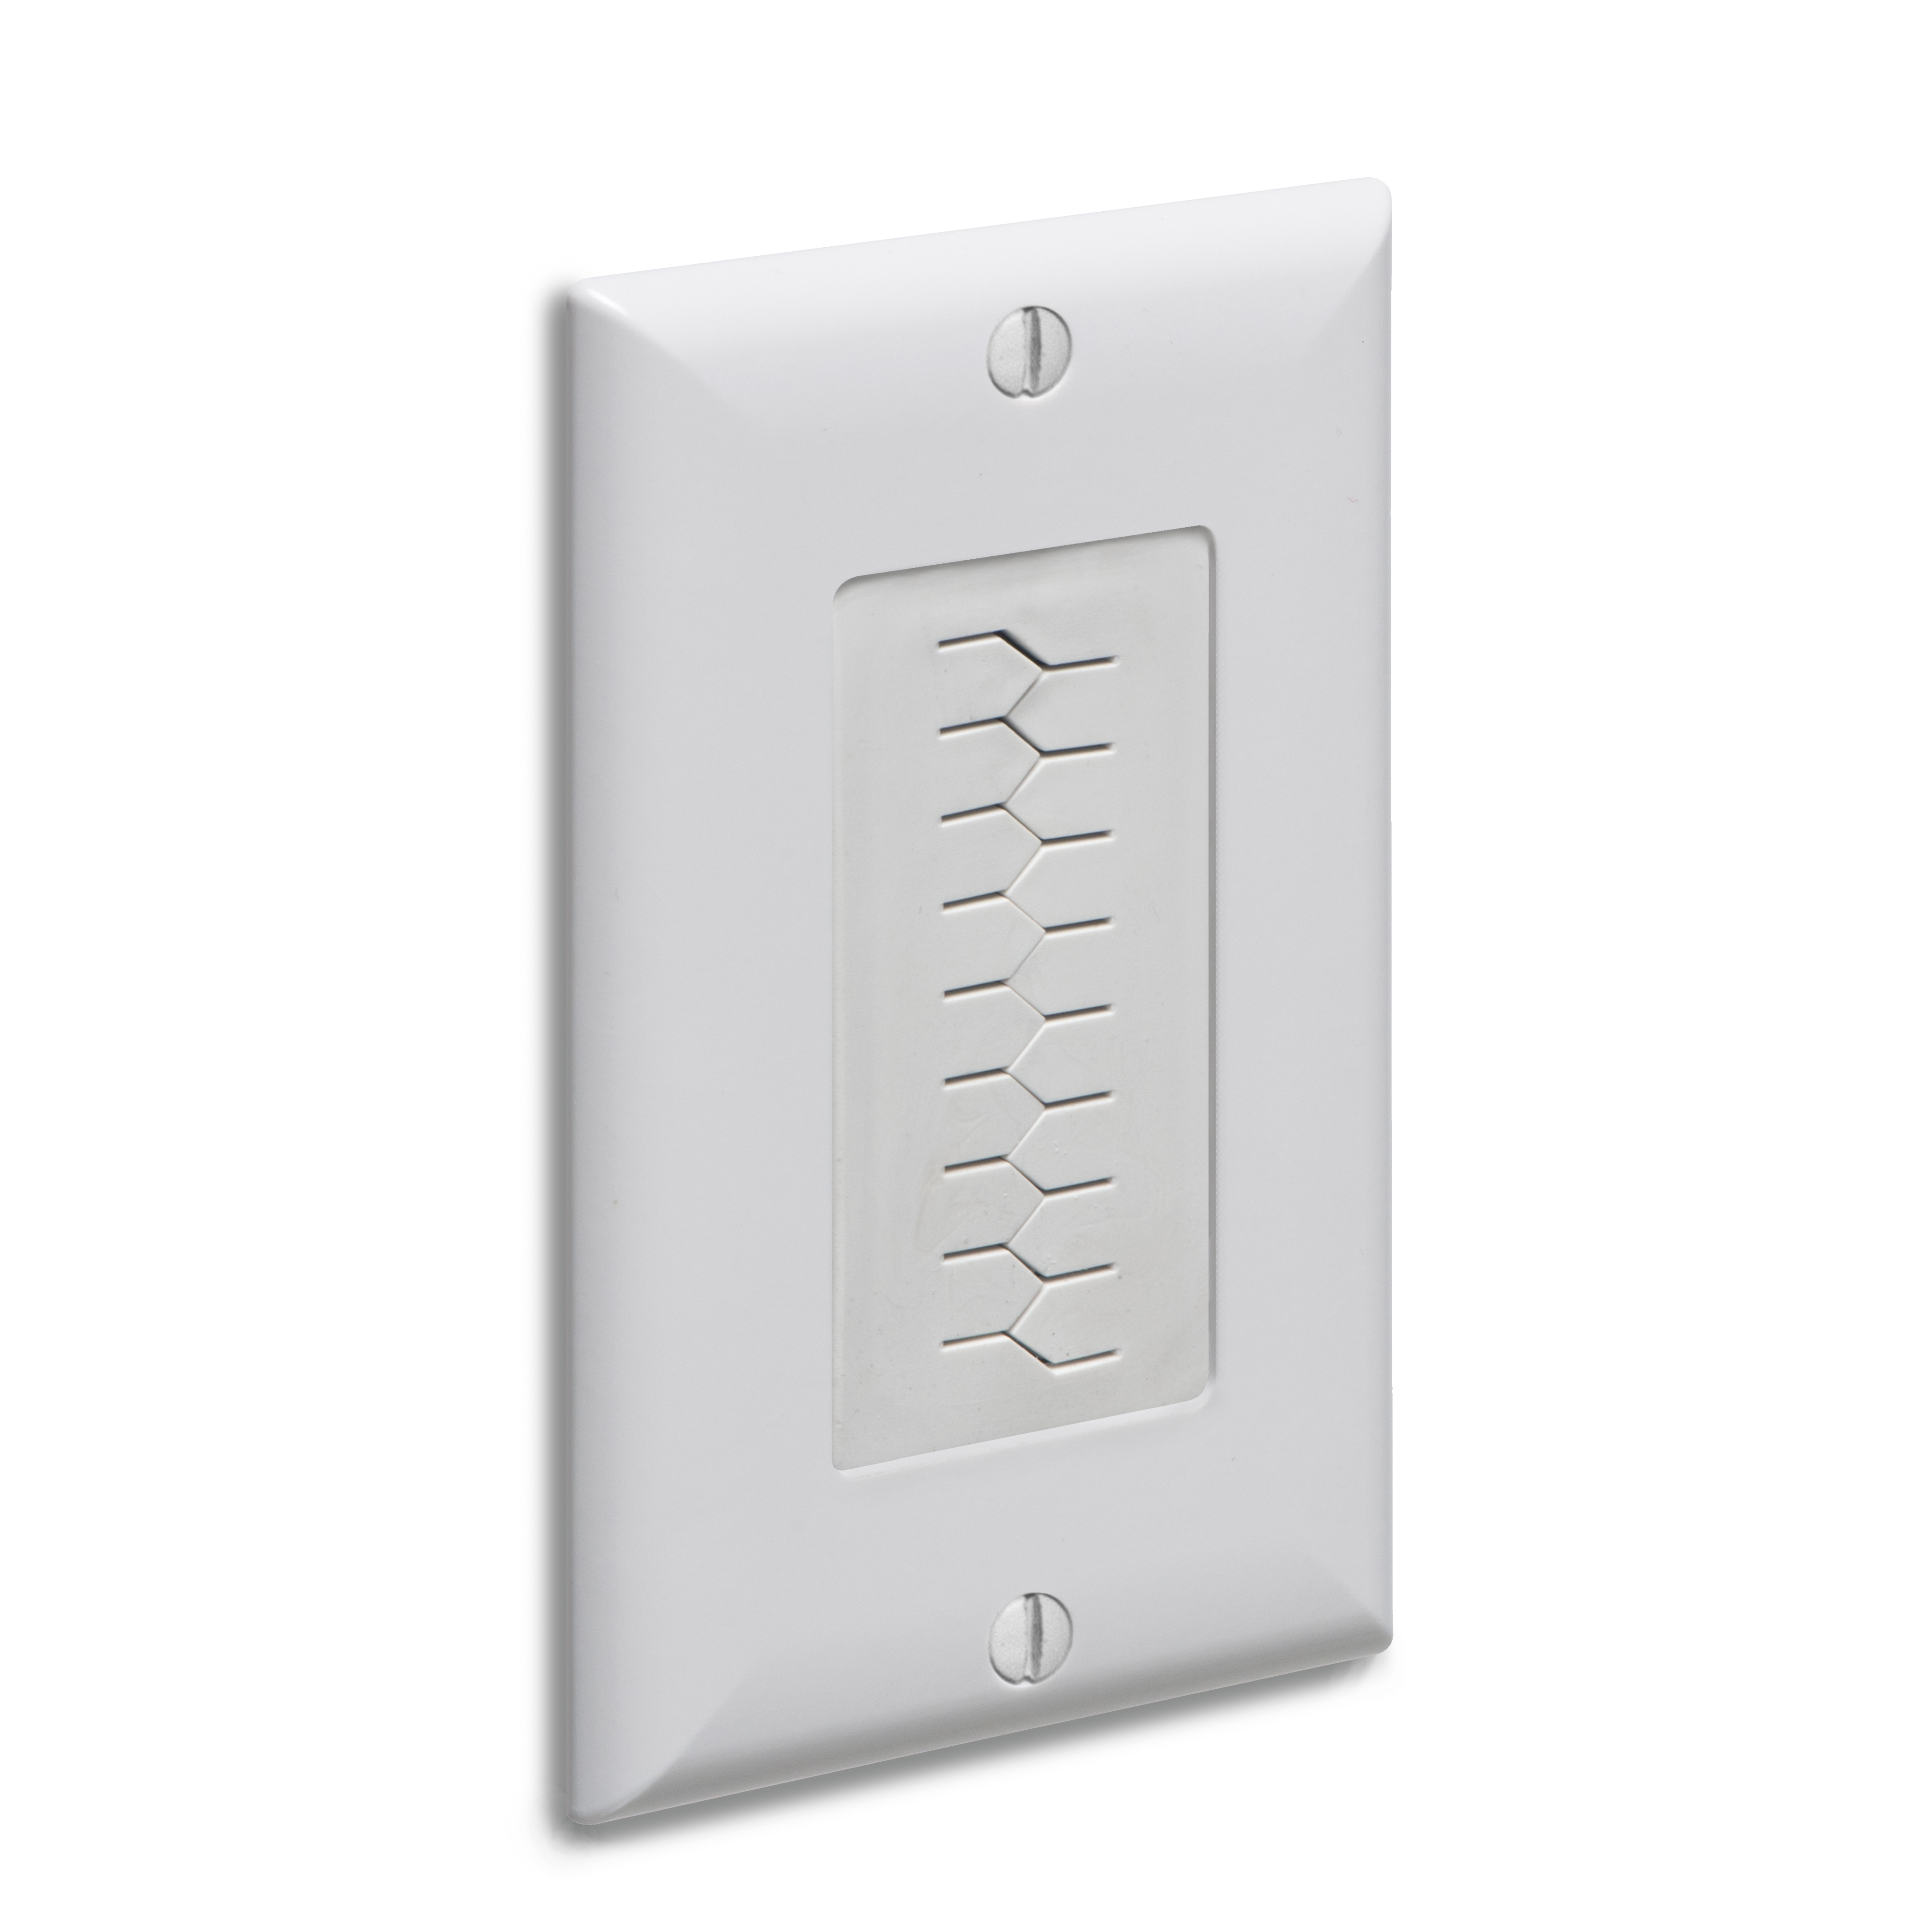 Cable entry device with slotted cover. White Non-metallic. Includes two #6 screws. Comes with wall plate.